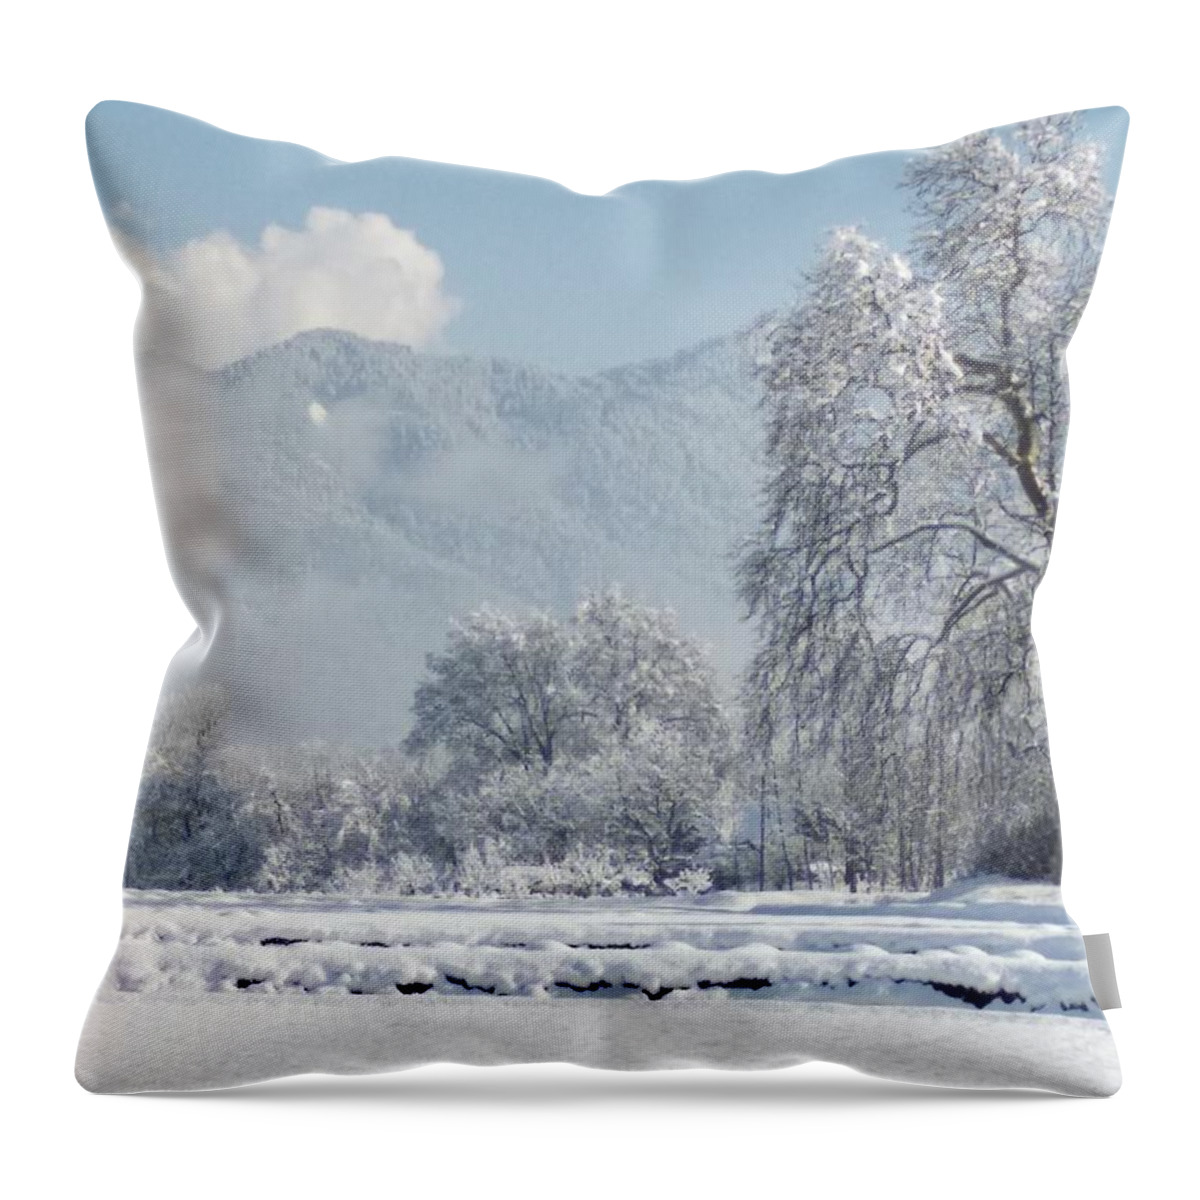  Throw Pillow featuring the photograph The Snow Story by Jacob